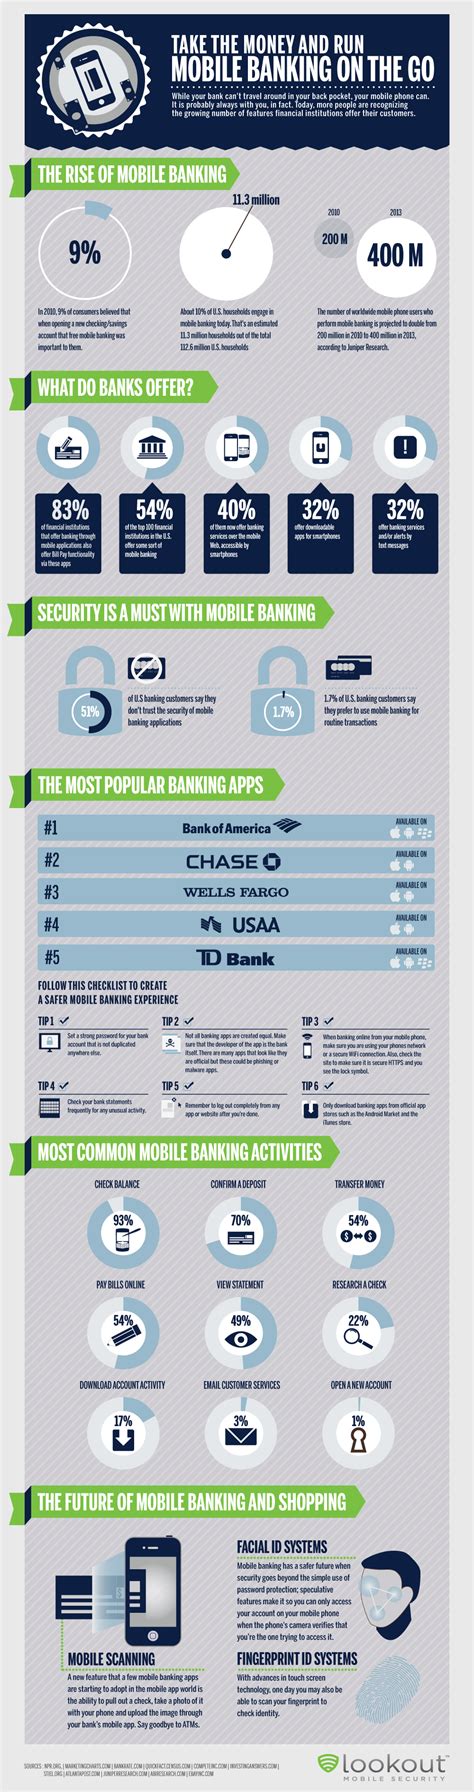 400 MILLION mobile phone users to perform mobile banking by 2013! | Mobile banking, Mobile ...